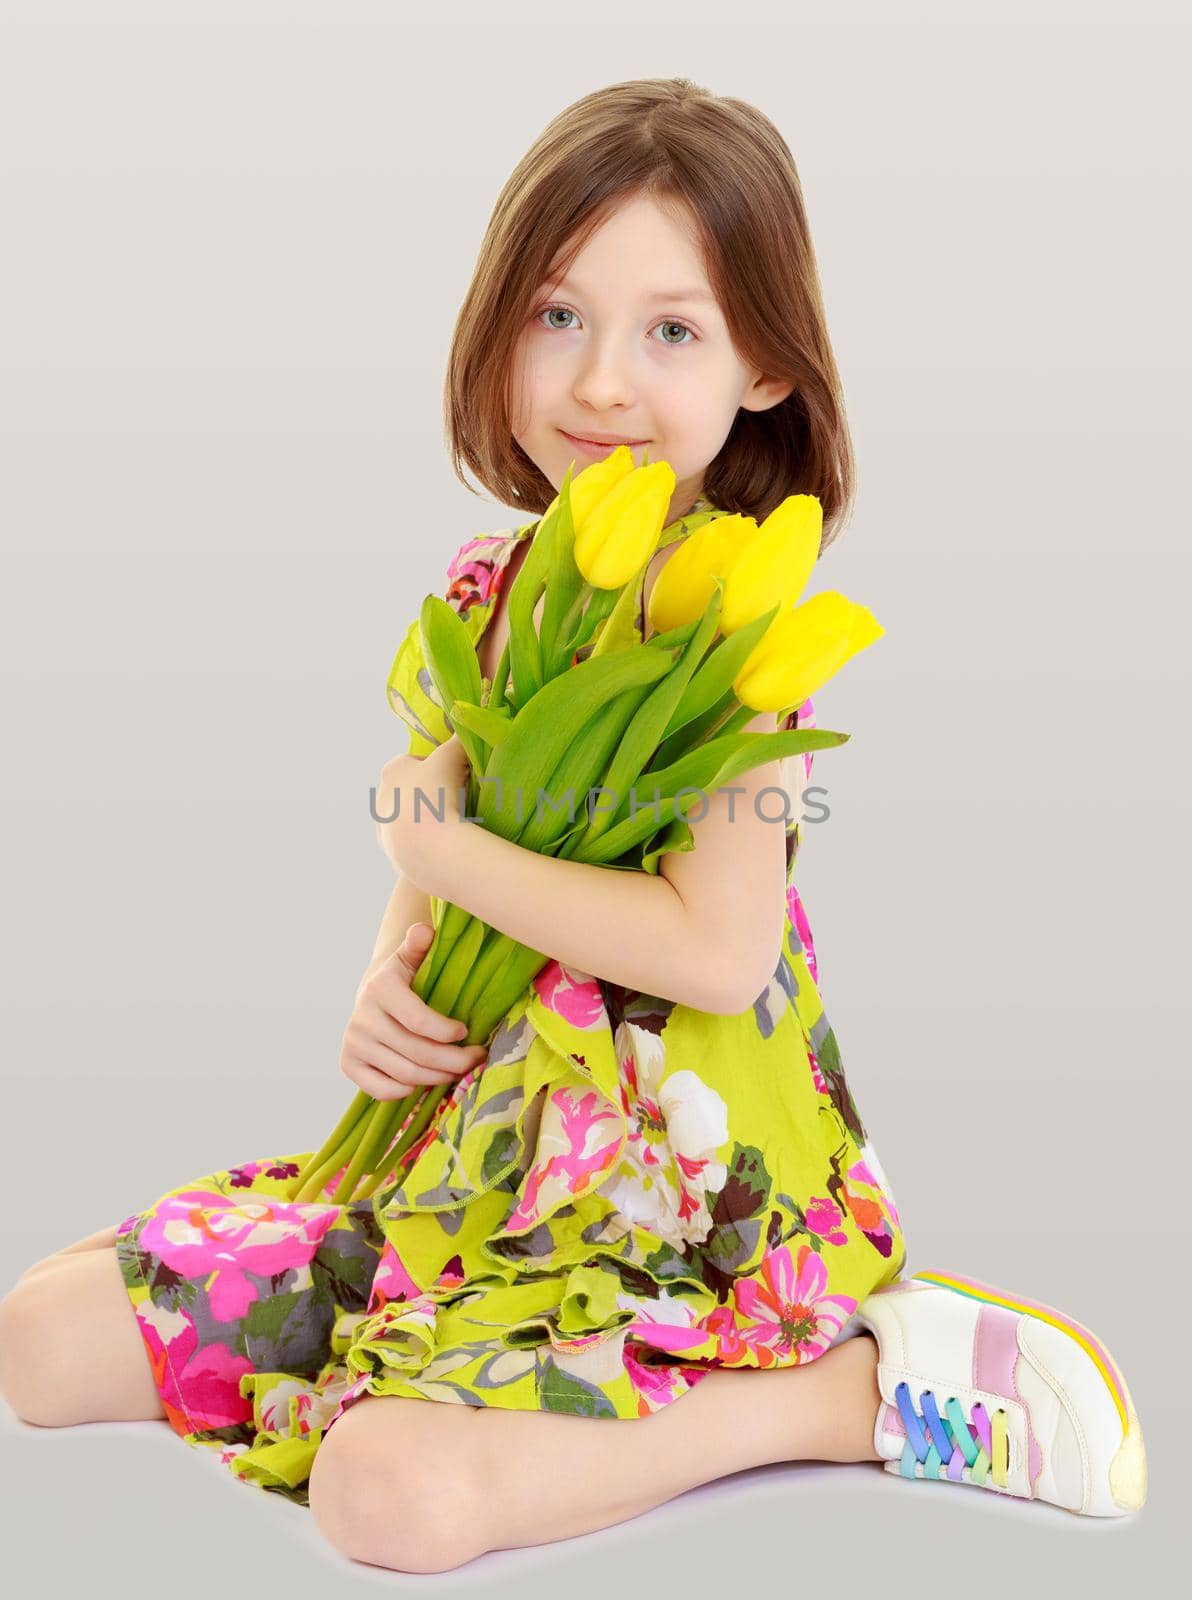 Adorable little Caucasian girl in summer dress holding a bouquet of yellow tulips.On the background of summer blue sky and fluffy clouds.